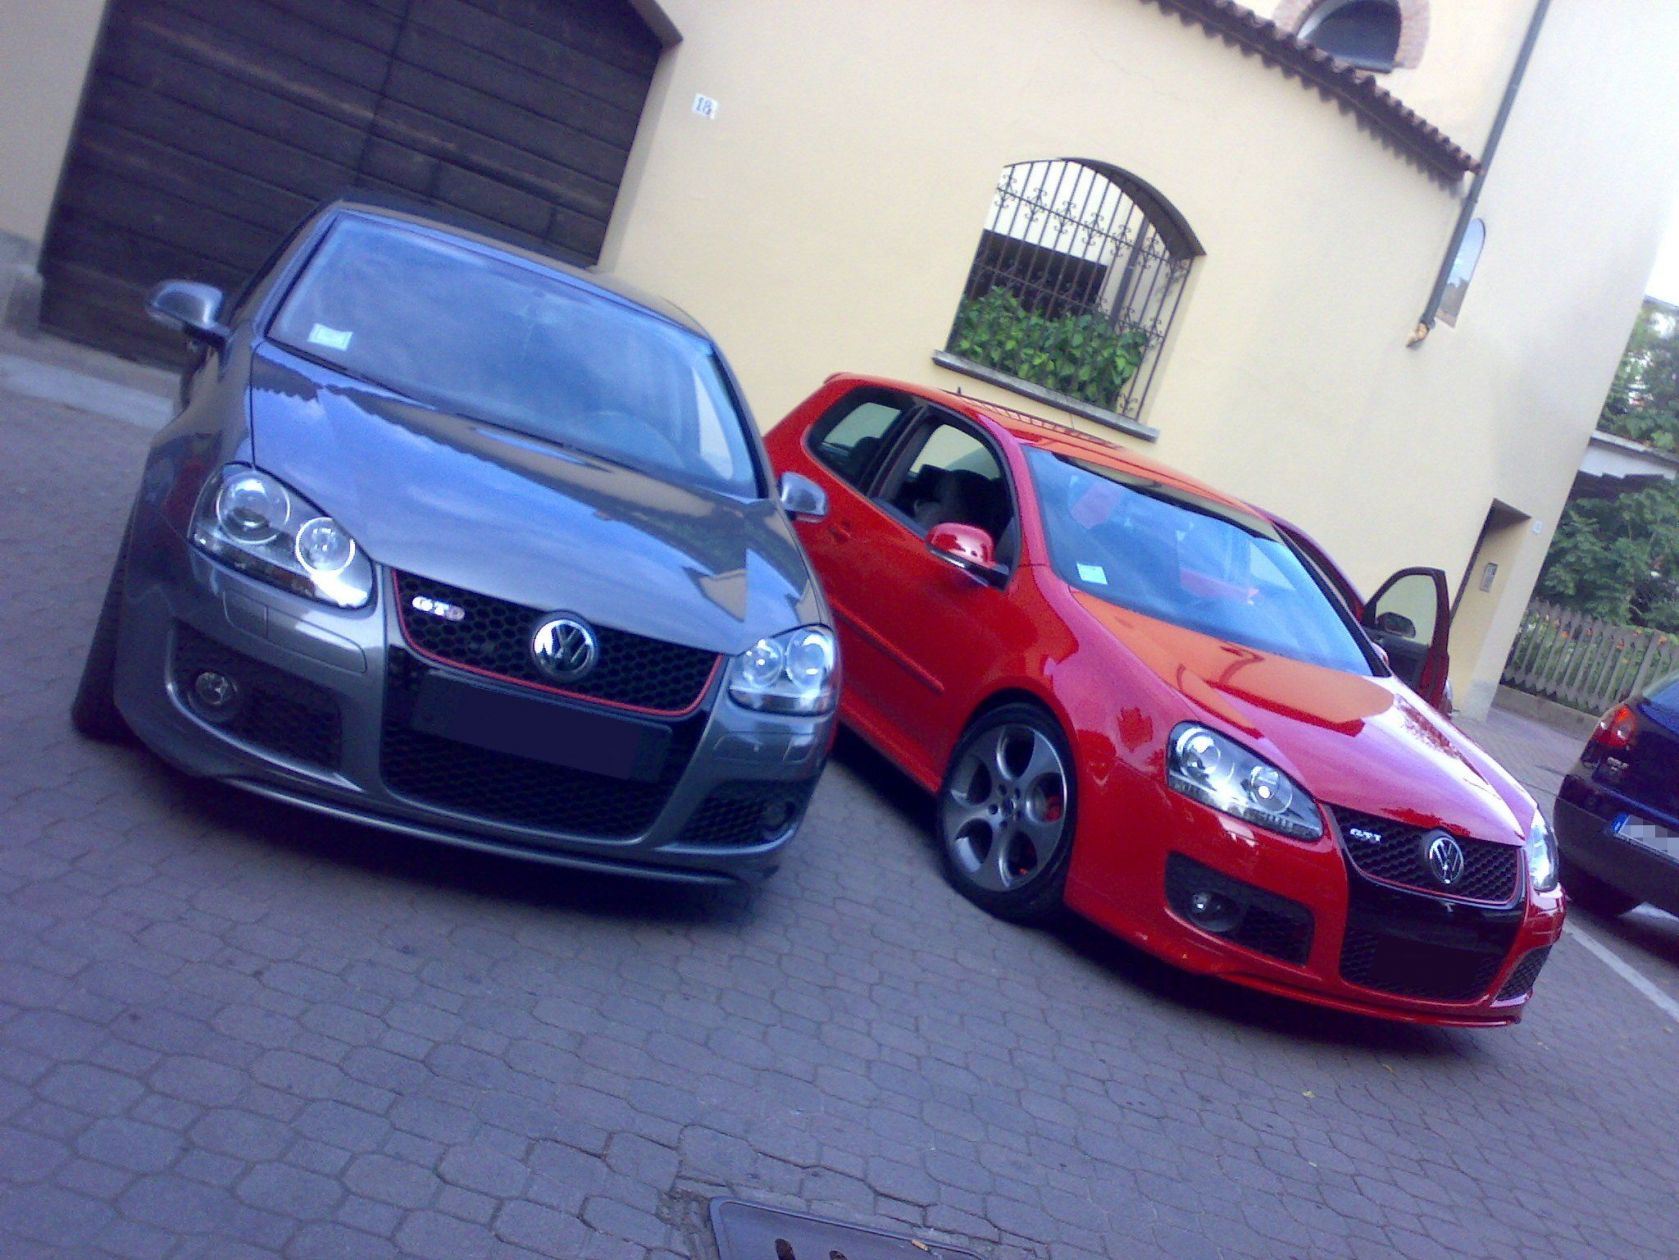 Fromy's & Andre's GTIs (1)
